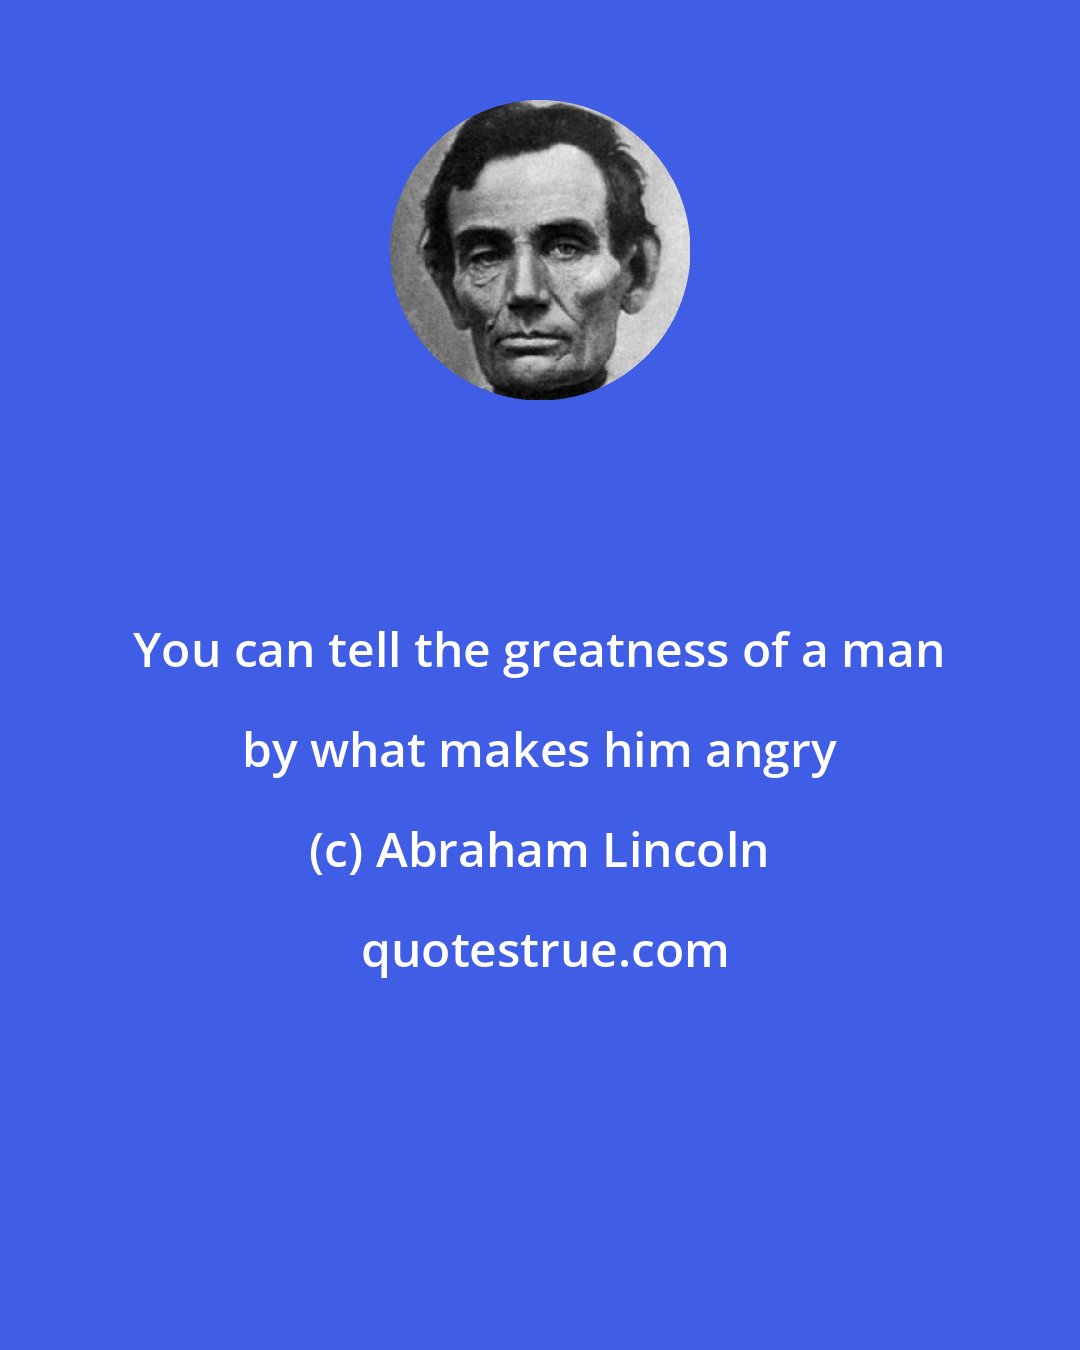 Abraham Lincoln: You can tell the greatness of a man by what makes him angry